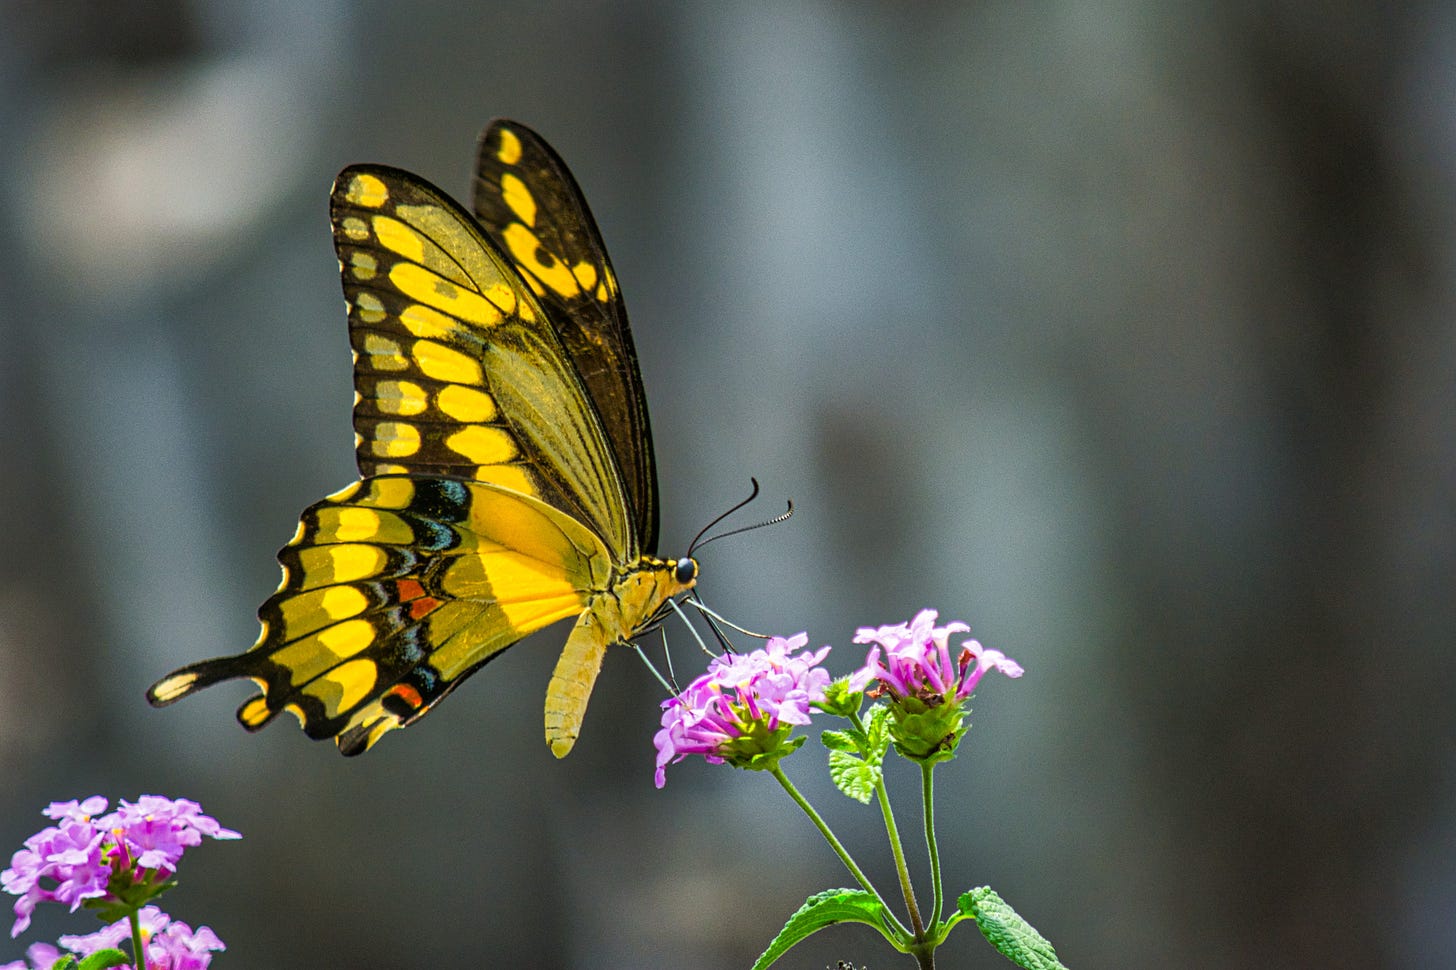 A swallowtail butterfly sitting on a pink lantana bloom with a blurred background